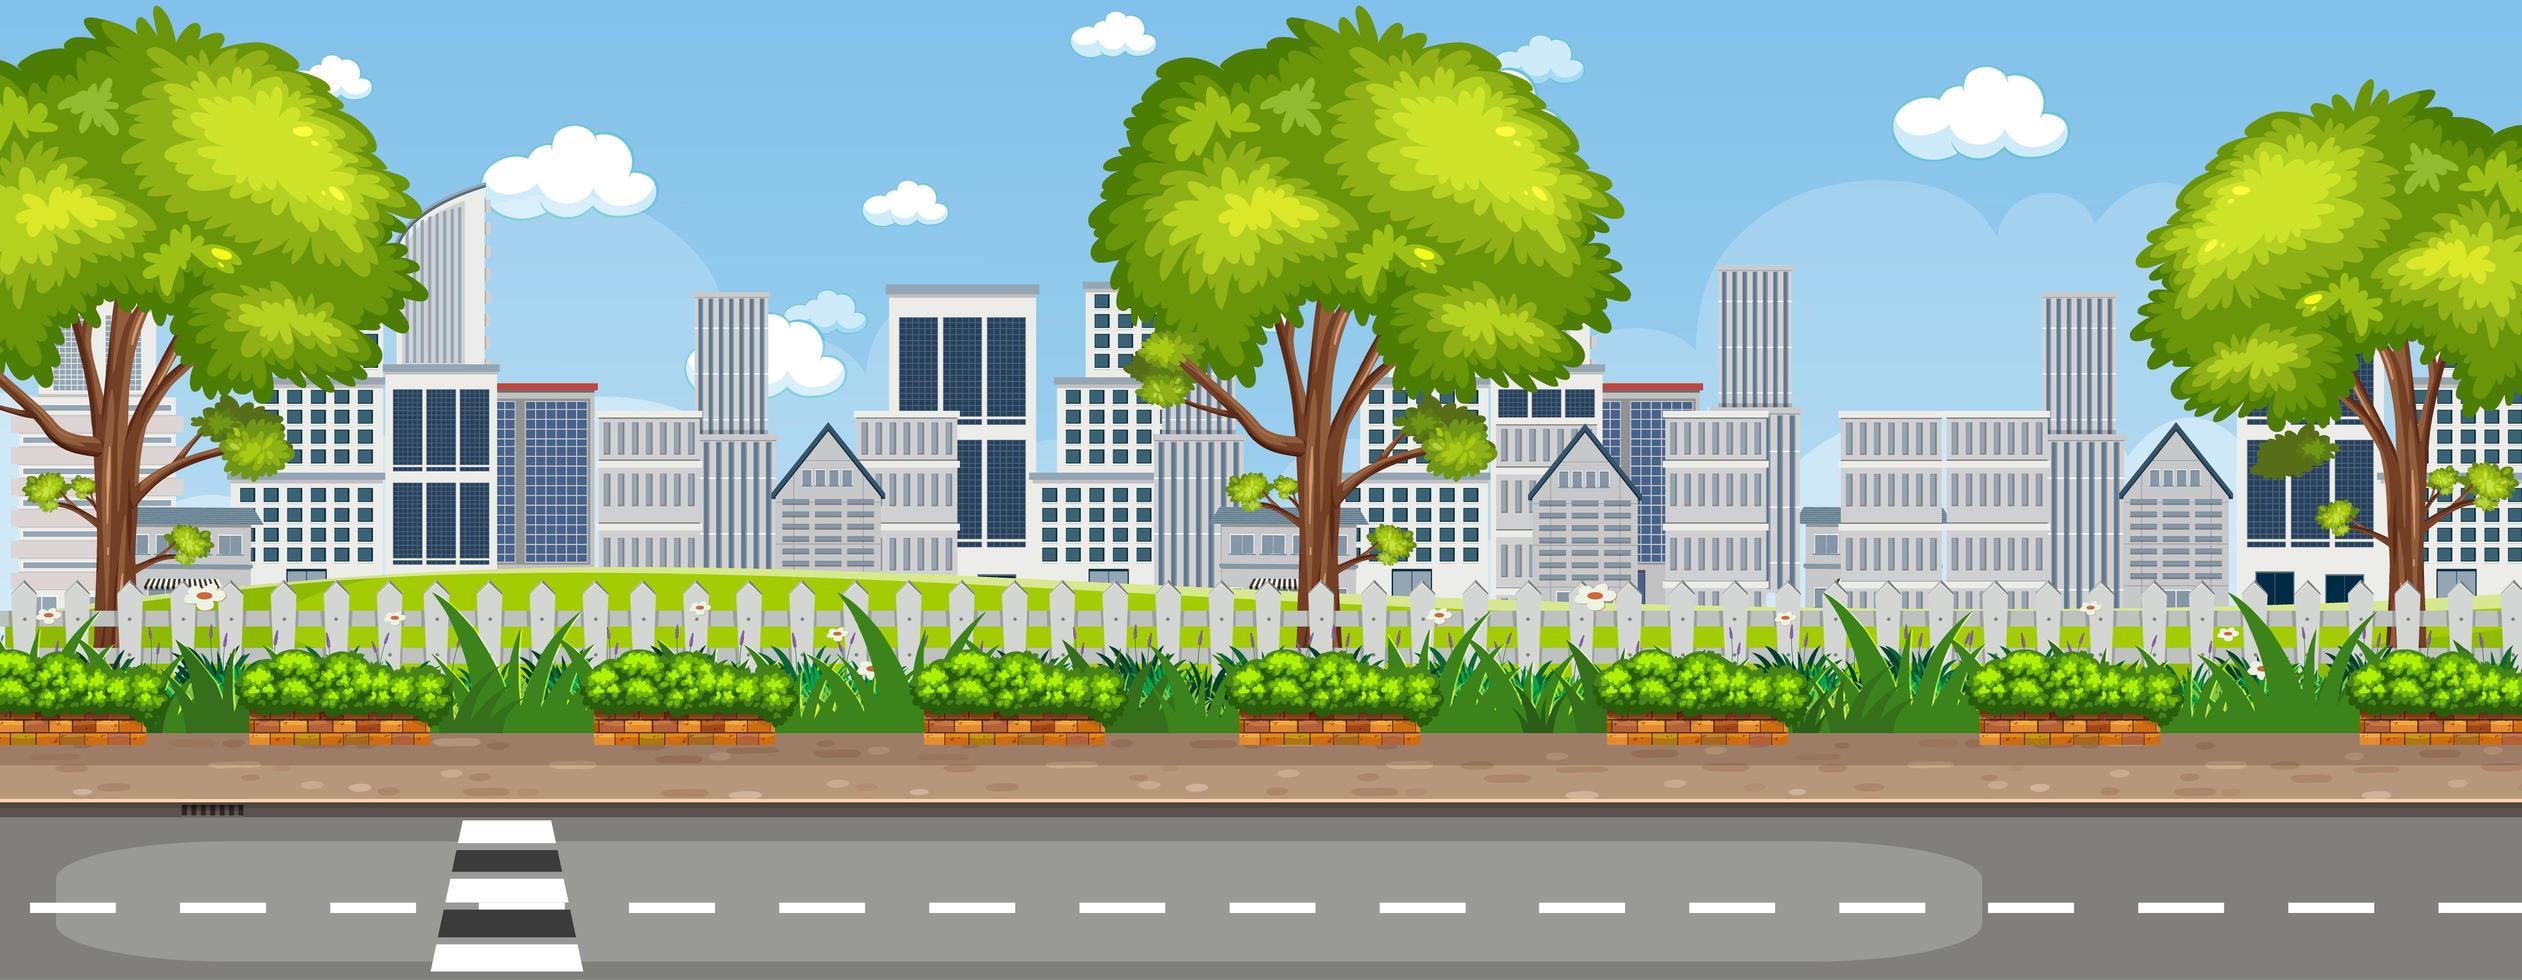 Outdoor landscape with urban view vector